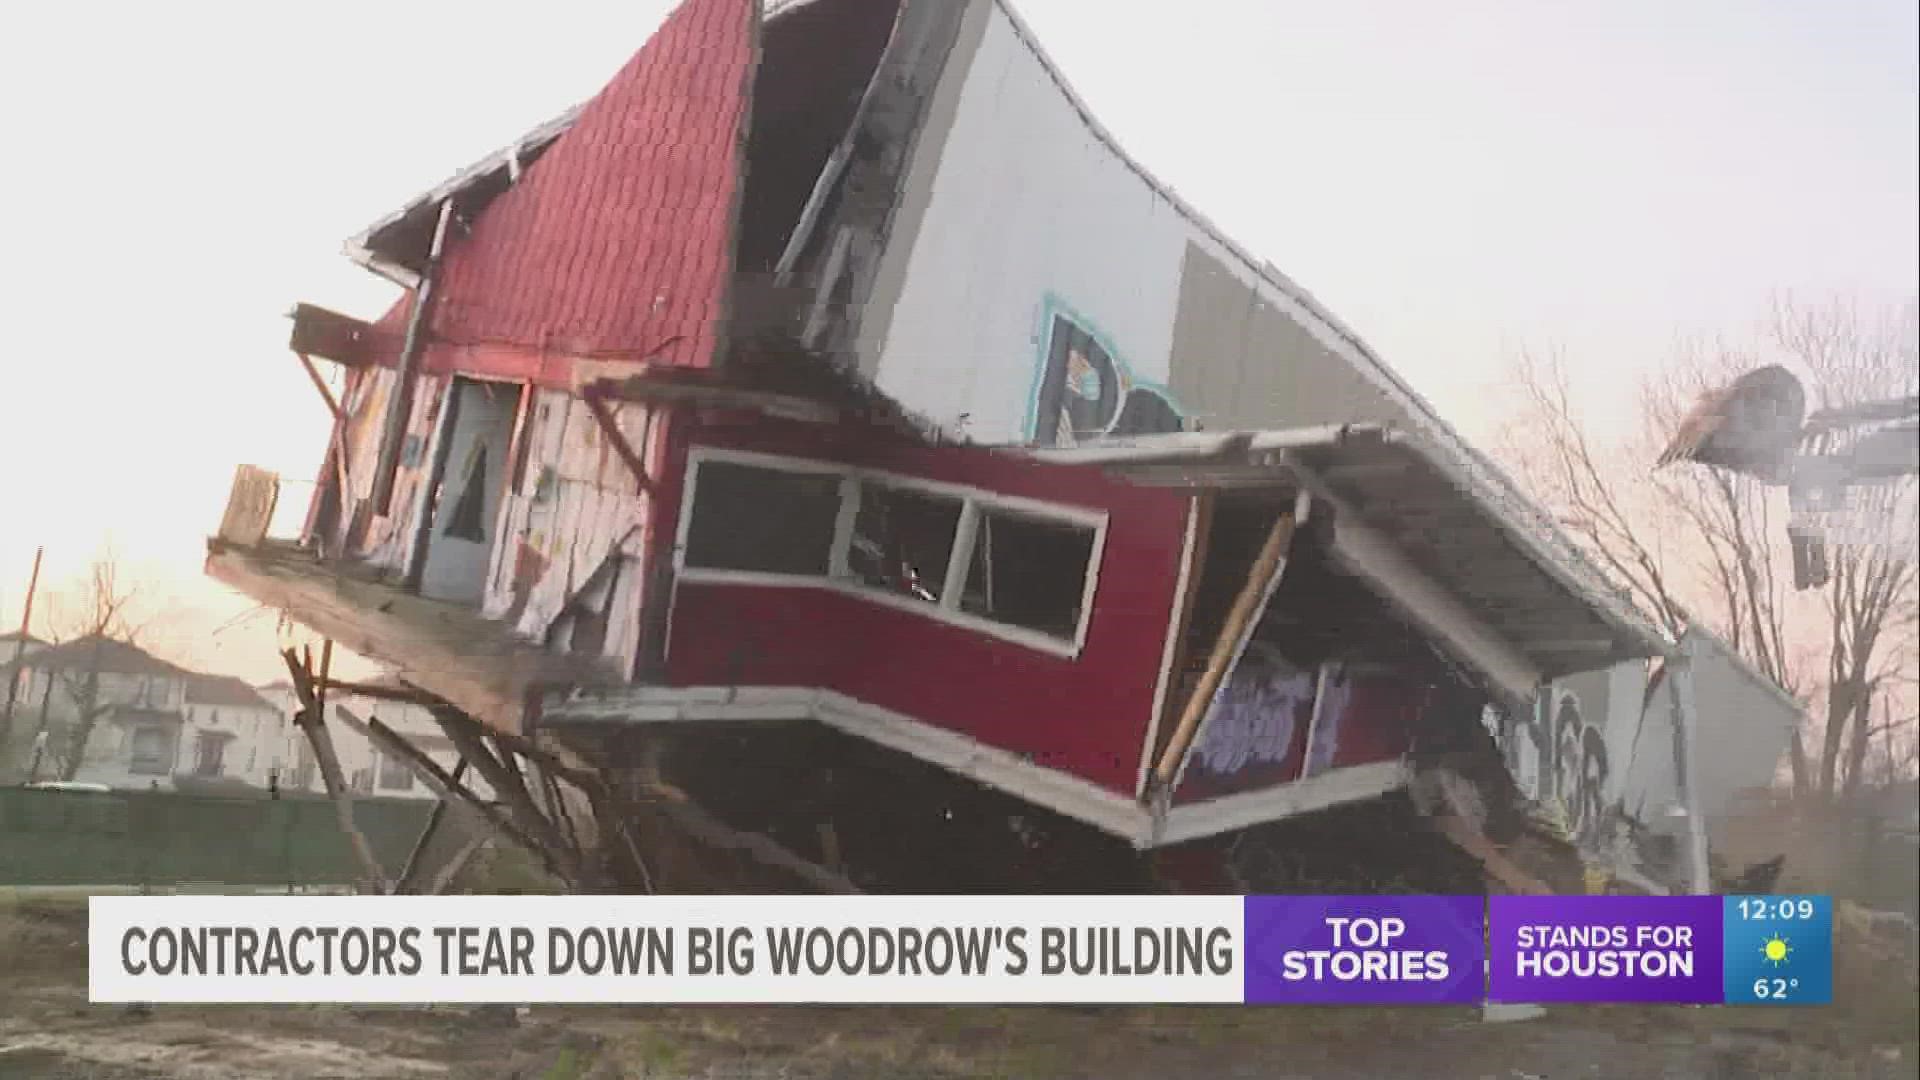 After being abandoned for nearly seven years, the building that once served as the home for Big Woodrow’s was demolished Friday morning.